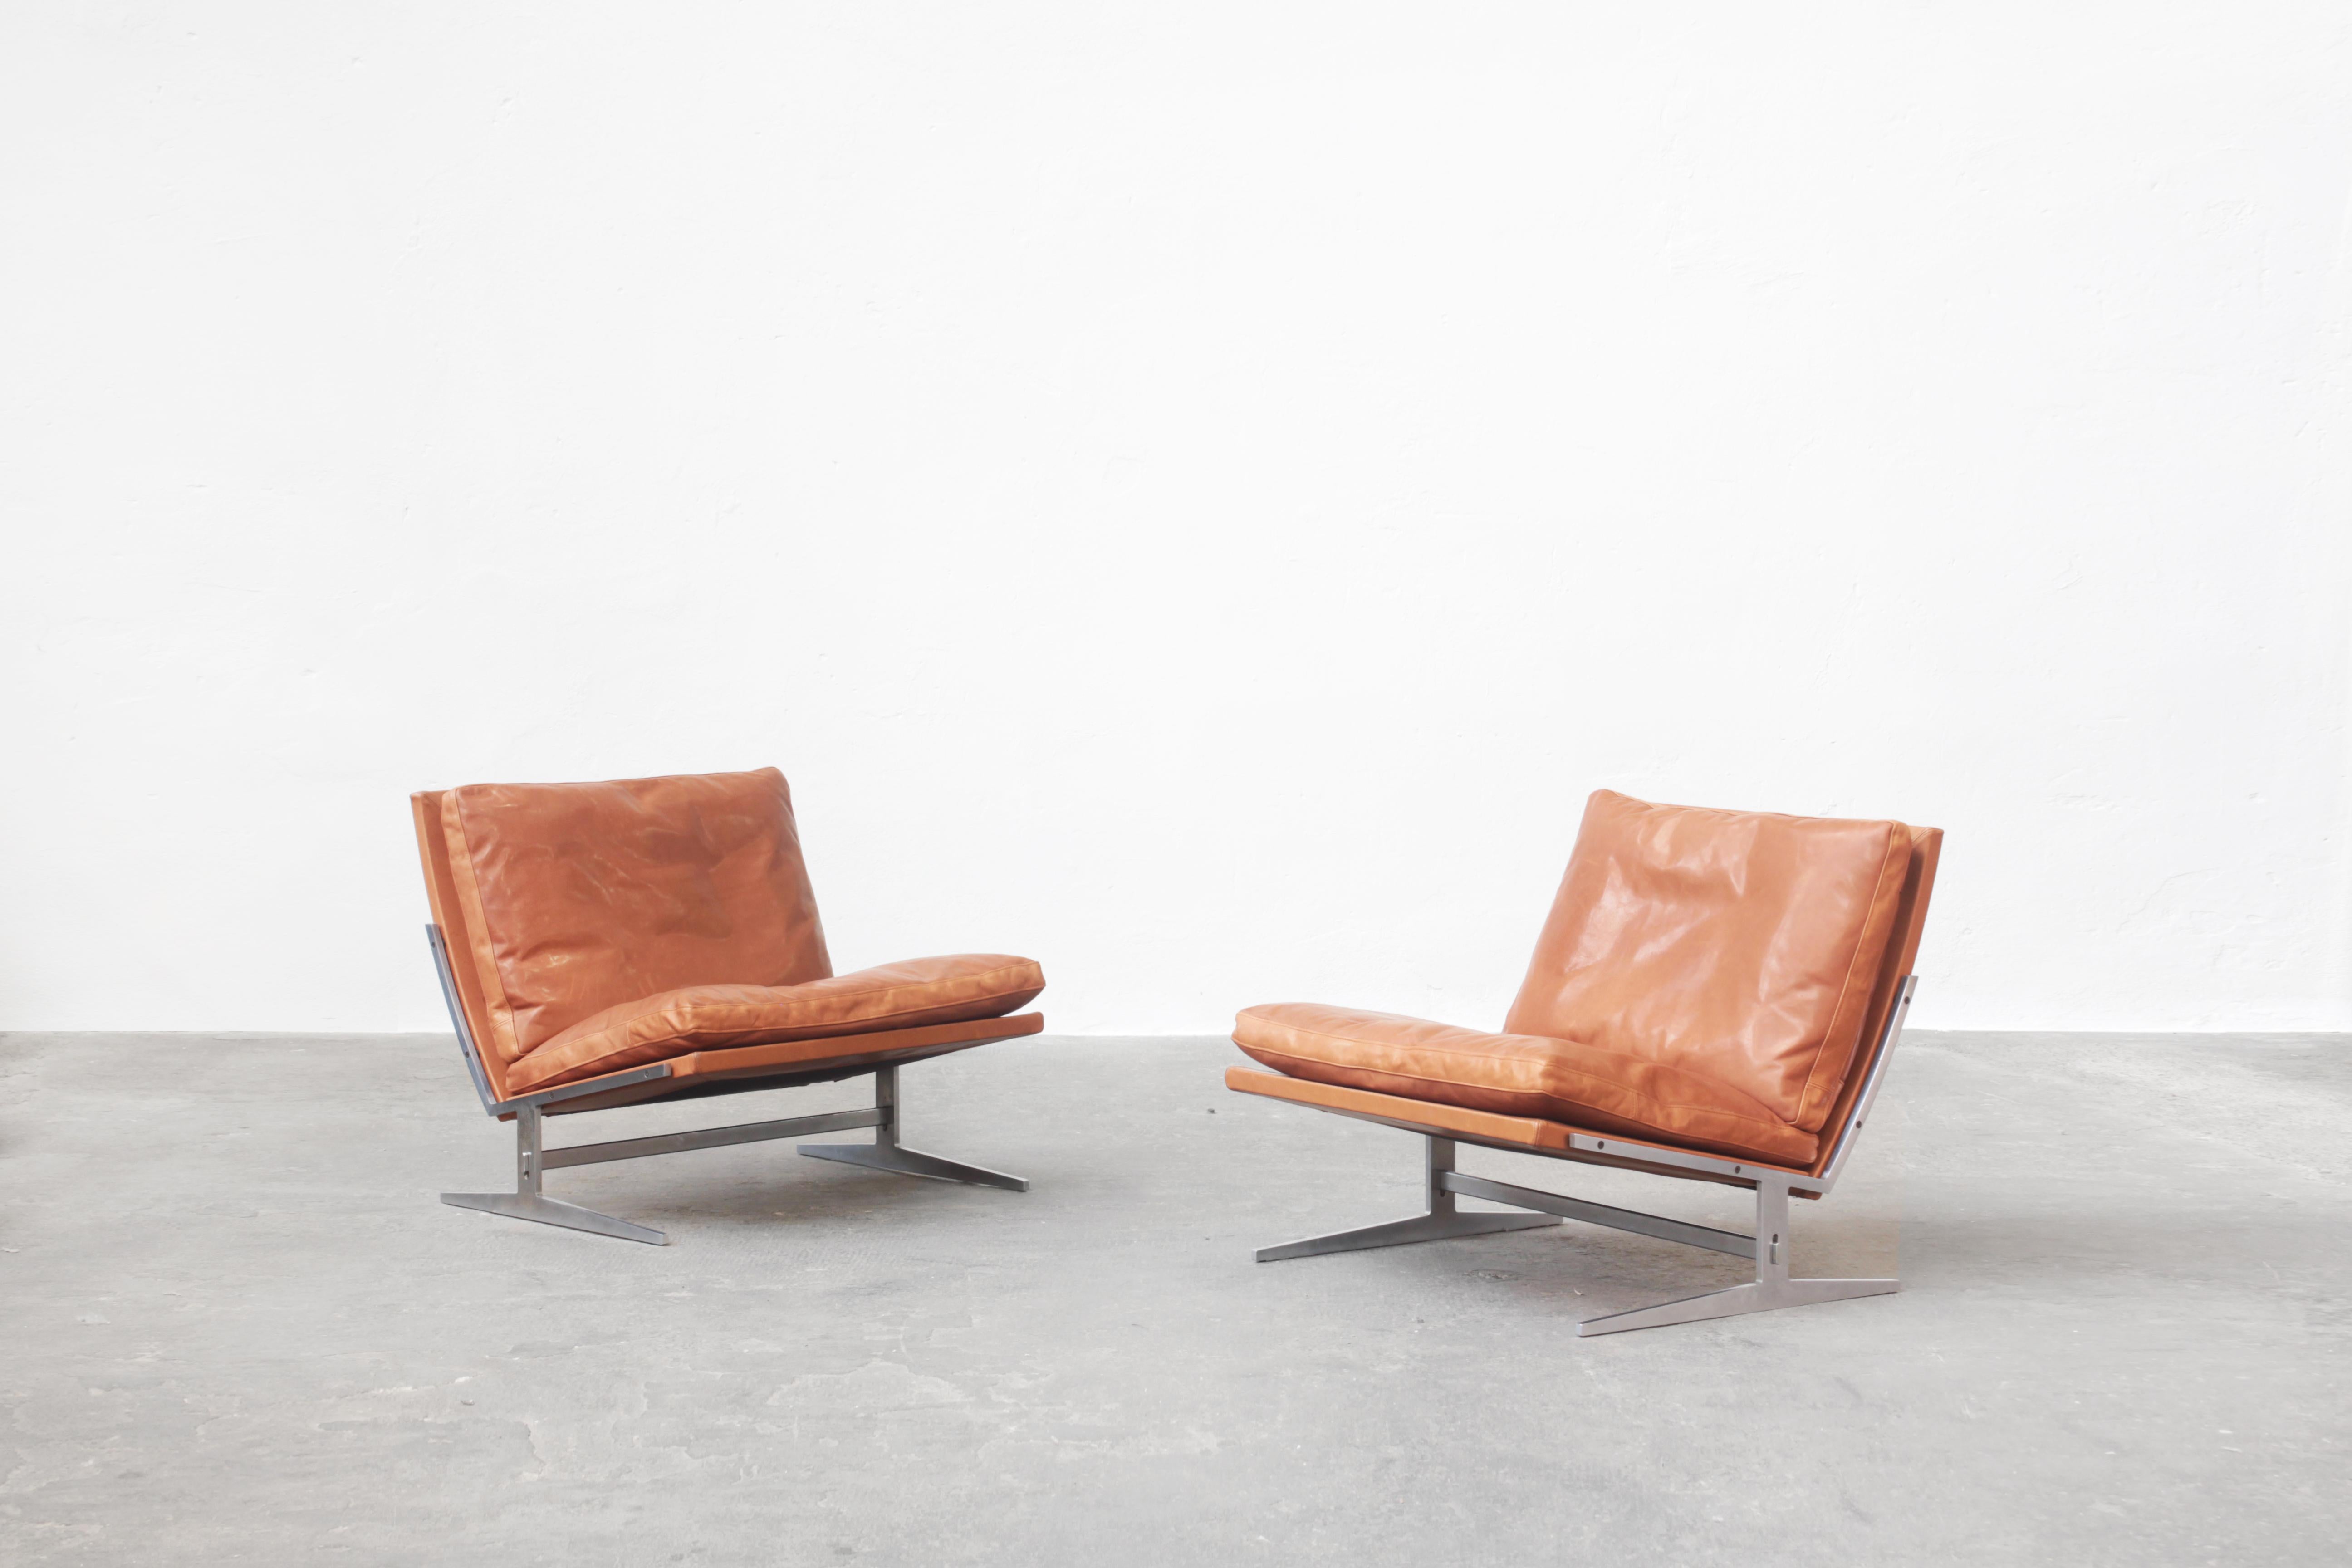 Beautiful Danish BO-561 lounge chairs in steel and leather designed by Preben Fabricius & Jorgen Kastholm for BO-EX.

Both chairs are in excellent condition and both were recently reupholstered and covered with a wonderful high-end leather in